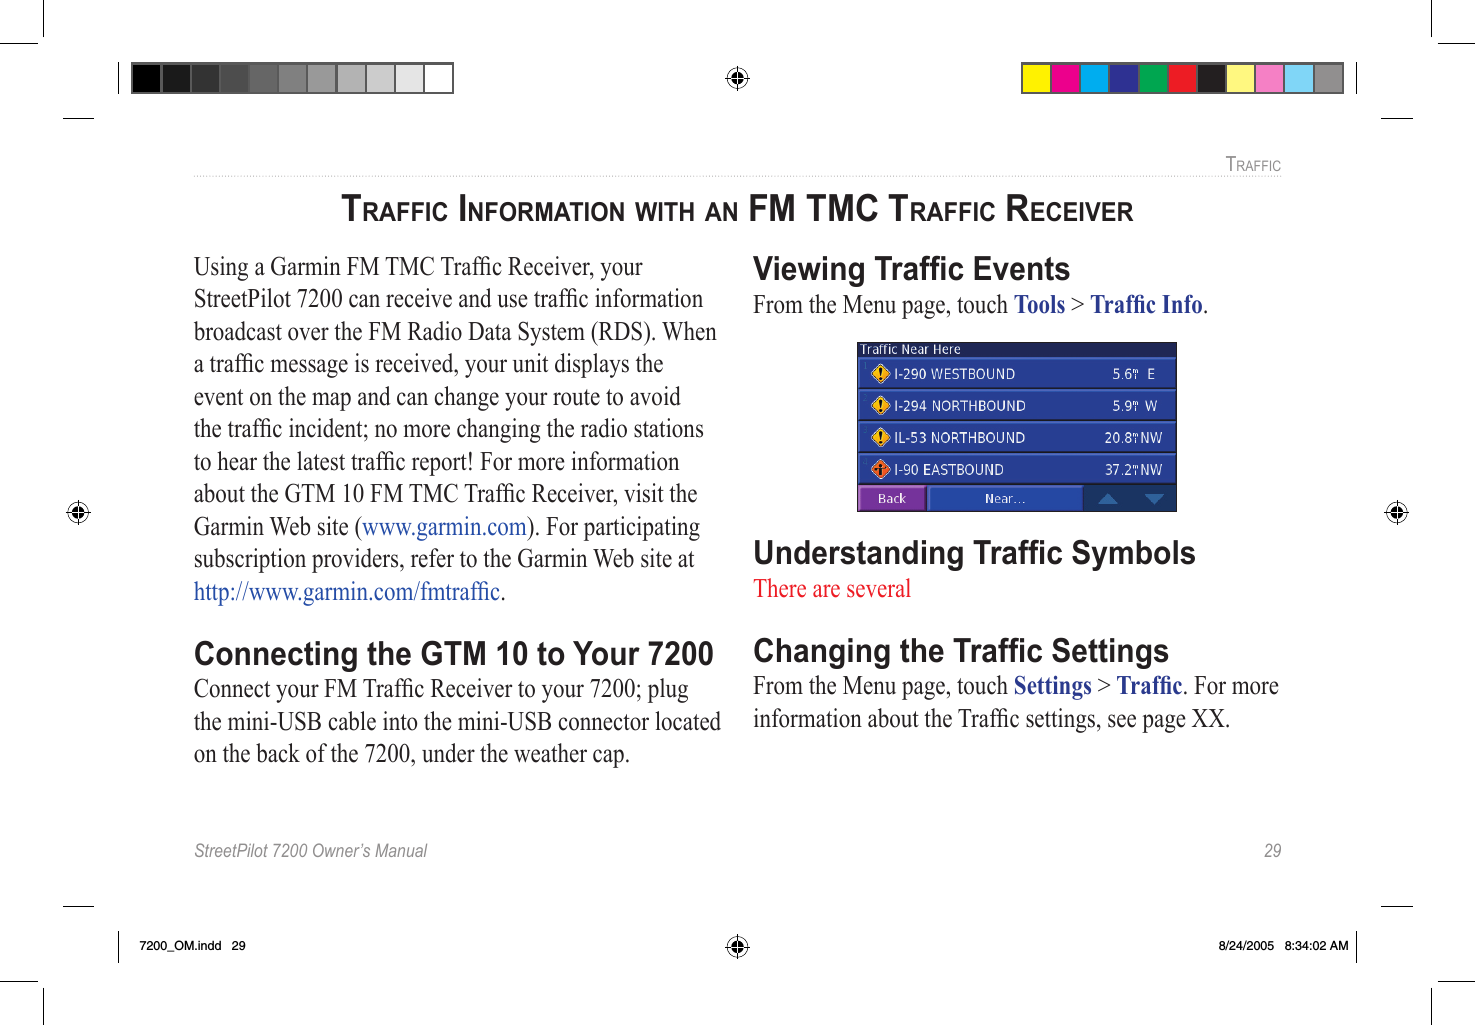 StreetPilot 7200 Owner’s Manual  29TRAFFICTRAFFIC INFORMATION WITH AN FM TMC TRAFFIC RECEIVER Using a Garmin FM TMC Trafﬁc Receiver, your StreetPilot 7200 can receive and use trafﬁc information broadcast over the FM Radio Data System (RDS). When a trafﬁc message is received, your unit displays the event on the map and can change your route to avoid the trafﬁc incident; no more changing the radio stations to hear the latest trafﬁc report! For more information about the GTM 10 FM TMC Trafﬁc Receiver, visit the Garmin Web site (www.garmin.com). For participating subscription providers, refer to the Garmin Web site at  http://www.garmin.com/fmtrafﬁc. Connecting the GTM 10 to Your 7200Connect your FM Trafﬁc Receiver to your 7200; plug the mini-USB cable into the mini-USB connector located on the back of the 7200, under the weather cap. Viewing Trafﬁc EventsFrom the Menu page, touch Tools &gt; Trafﬁc Info. Understanding Trafﬁc SymbolsThere are several Changing the Trafﬁc SettingsFrom the Menu page, touch Settings &gt; Trafﬁc. For more information about the Trafﬁc settings, see page XX. 7200_OM.indd   29 8/24/2005   8:34:02 AM